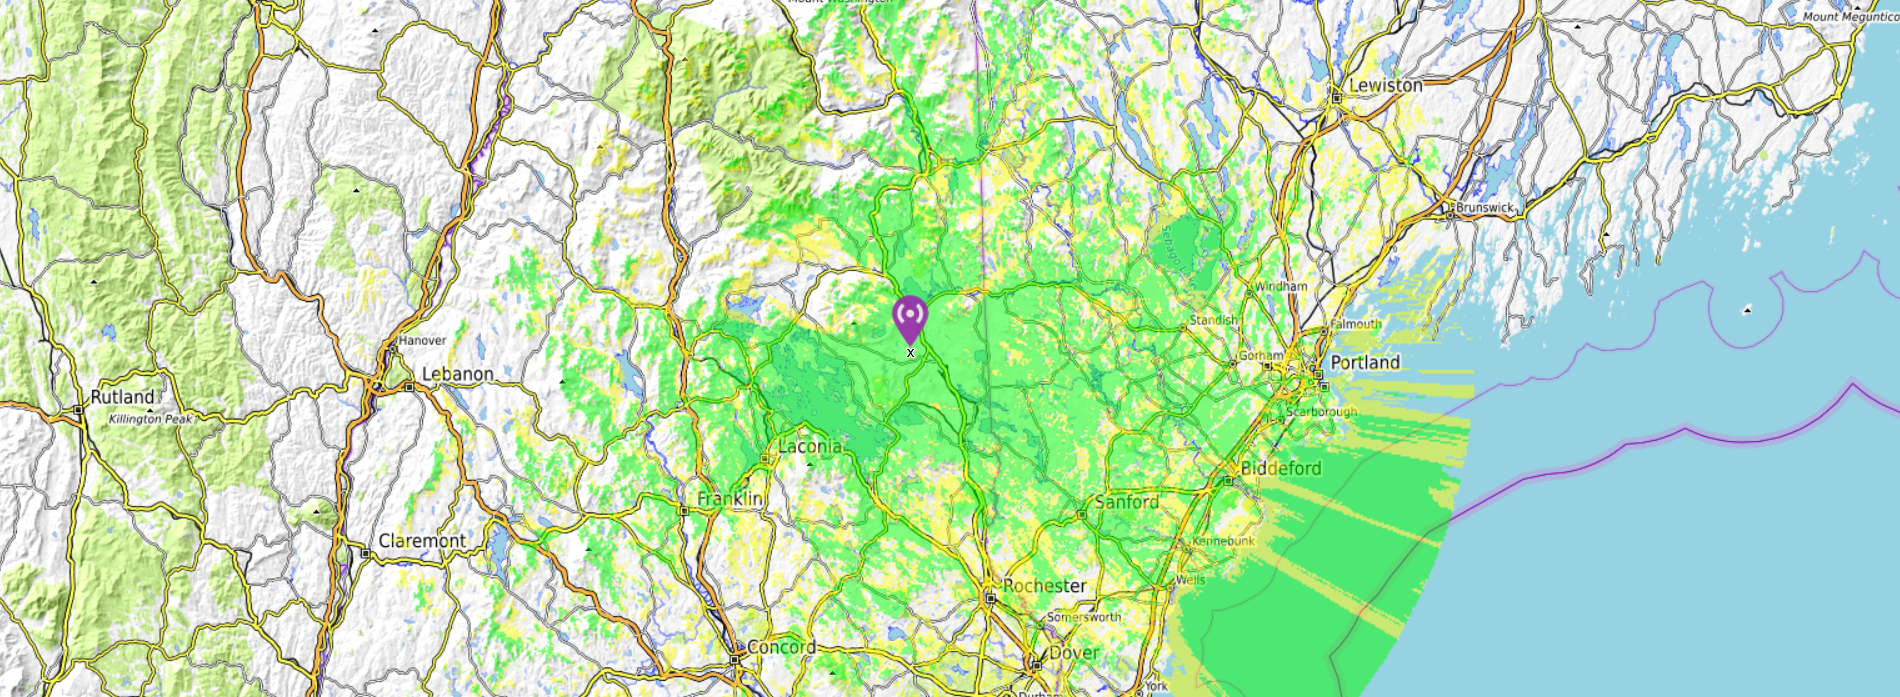 w1bst 442.100 mhz rf coverage map